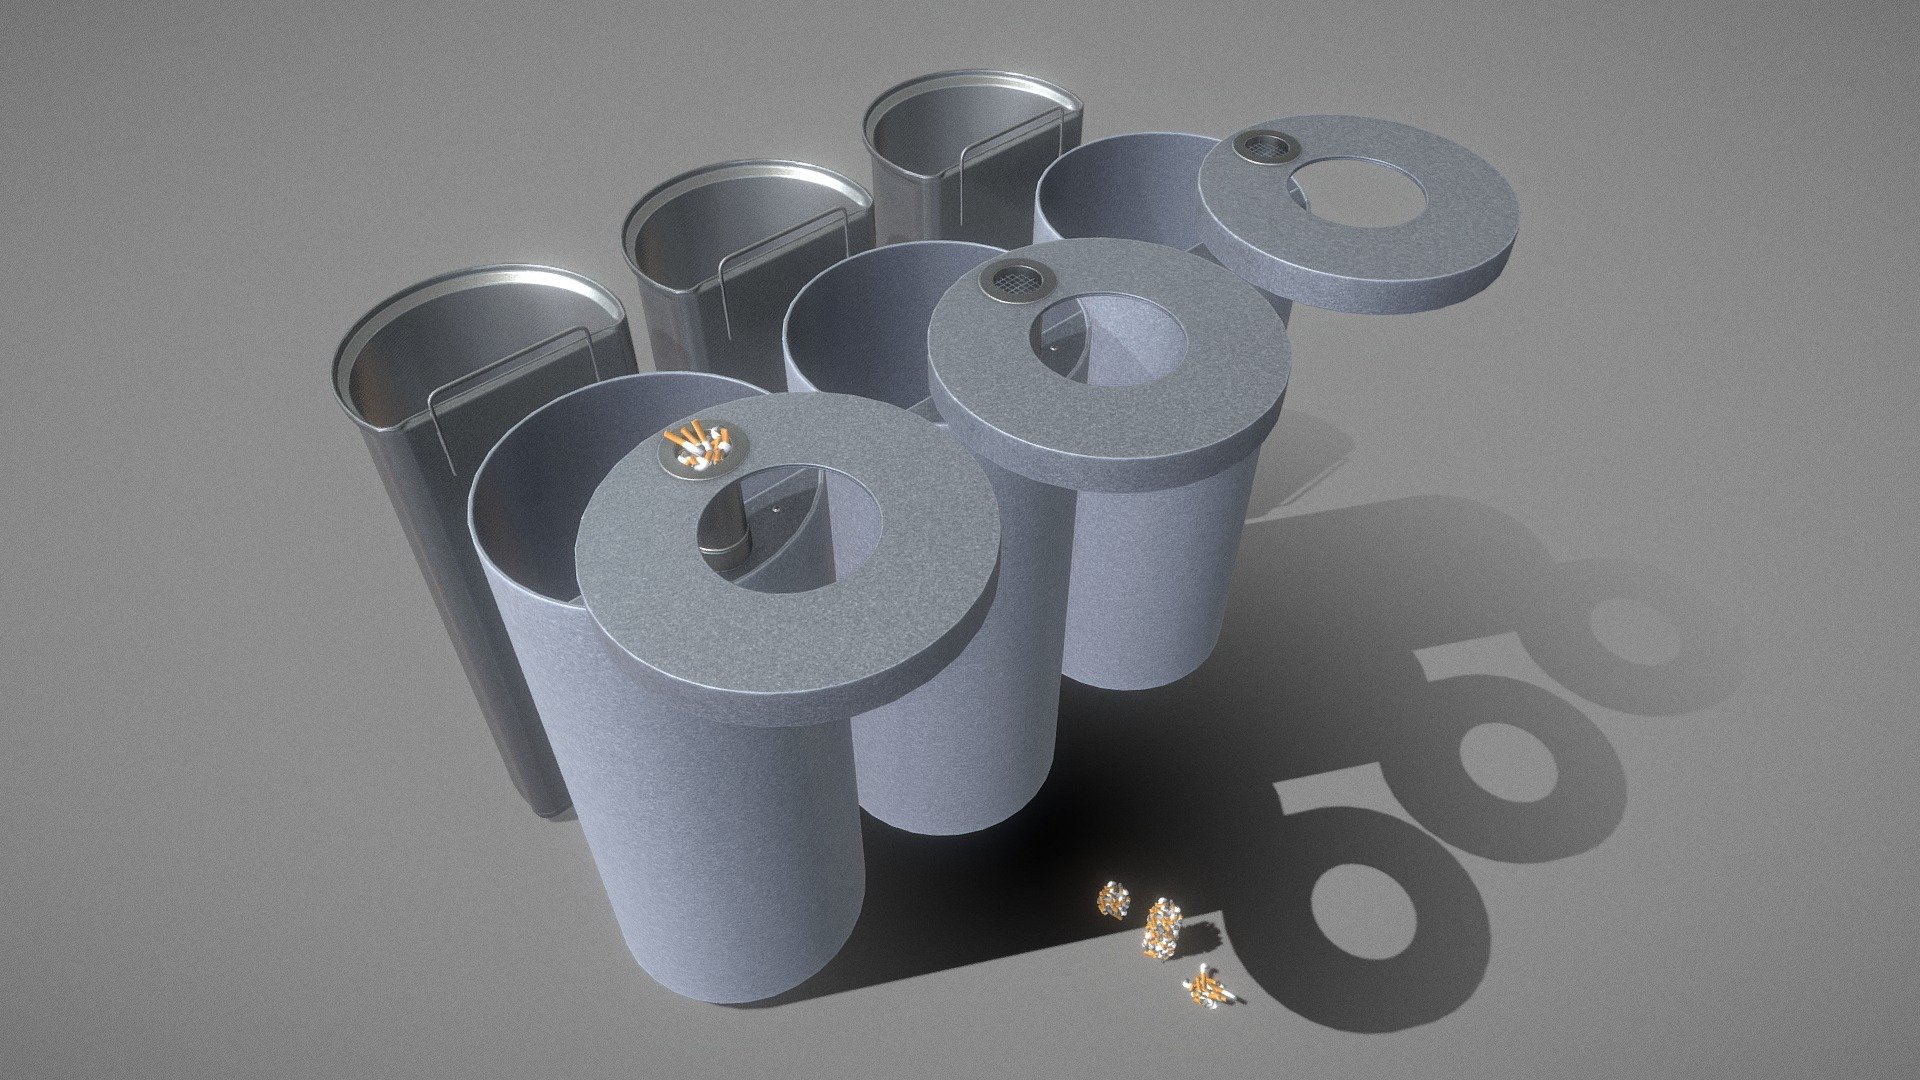 Here is version 2 of the animated trash can with ashtray and cigarette butts in three versions.






animated-trash-can-low-poly-version-1

animated-trash-can-high-poly-version

modular-cigarettes-high-poly

Modeled, textured and animated by 3DHaupt in Blender-2.81a - Animated Trash Can (Low-Poly Version-2) - Buy Royalty Free 3D model by VIS-All-3D (@VIS-All) 3d model